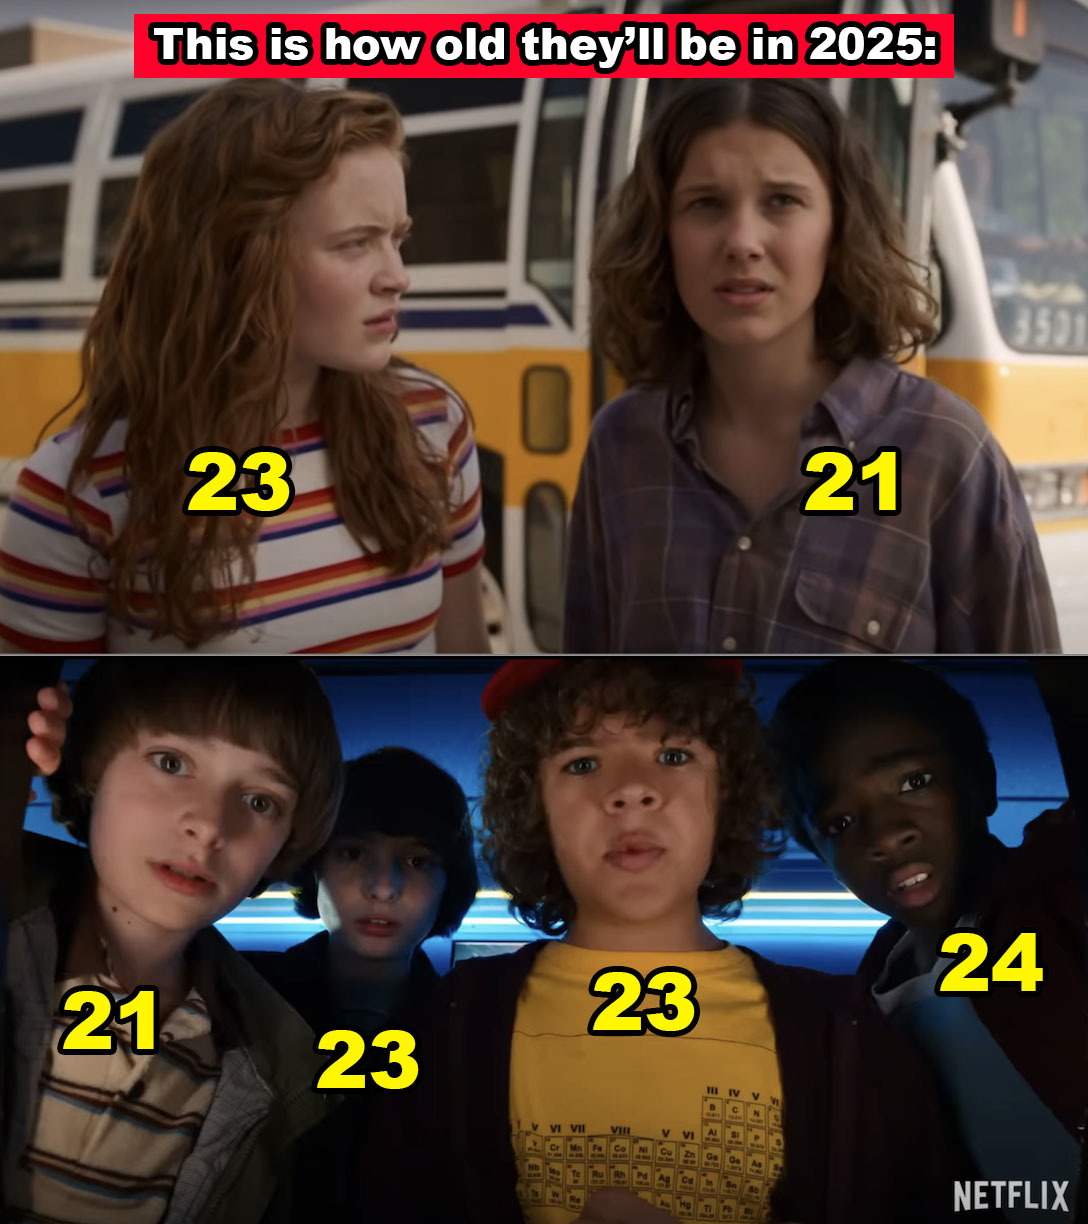 The &quot;child&quot; actors in the series